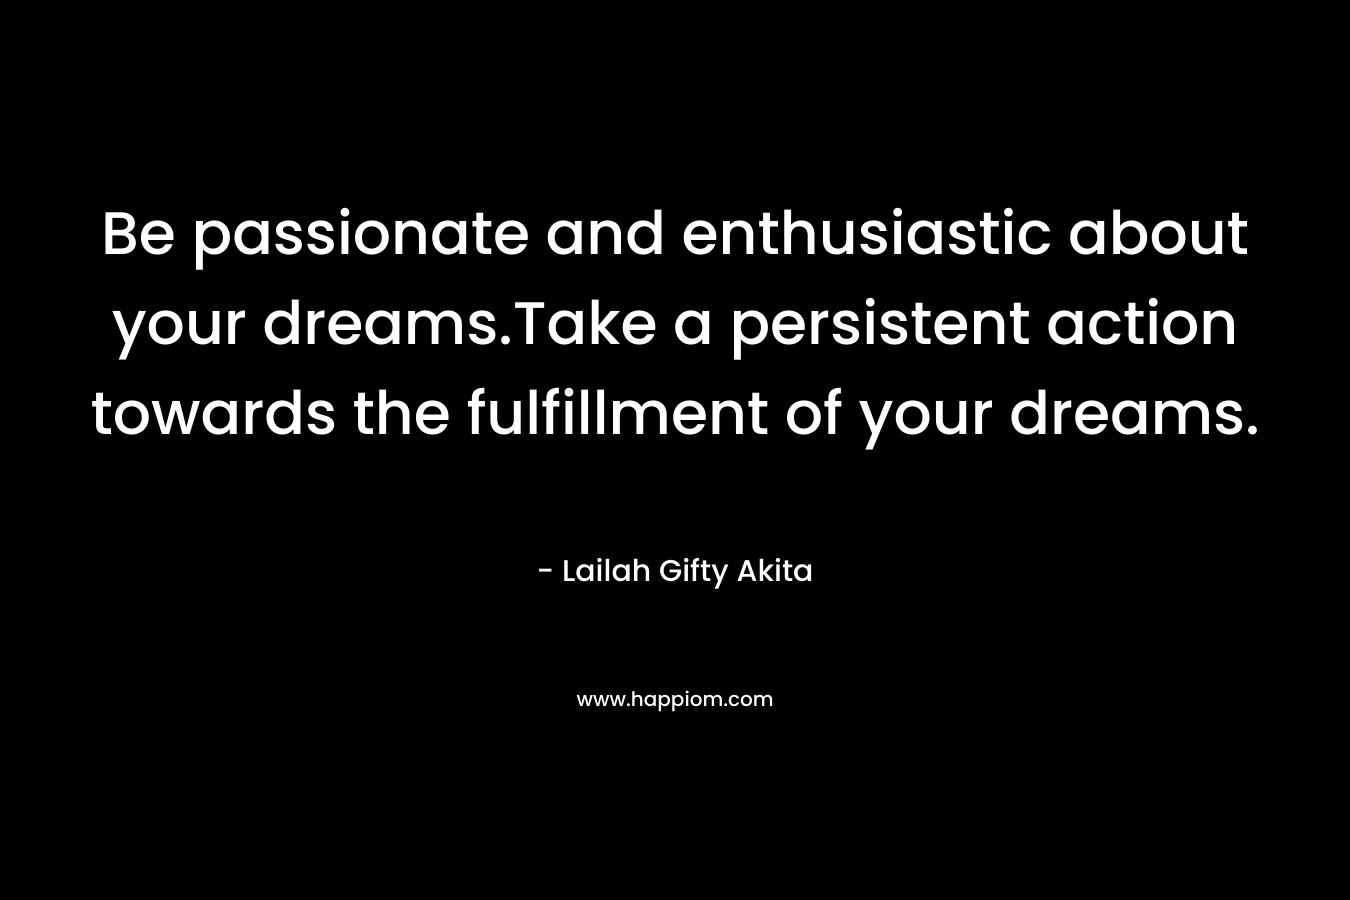 Be passionate and enthusiastic about your dreams.Take a persistent action towards the fulfillment of your dreams. – Lailah Gifty Akita